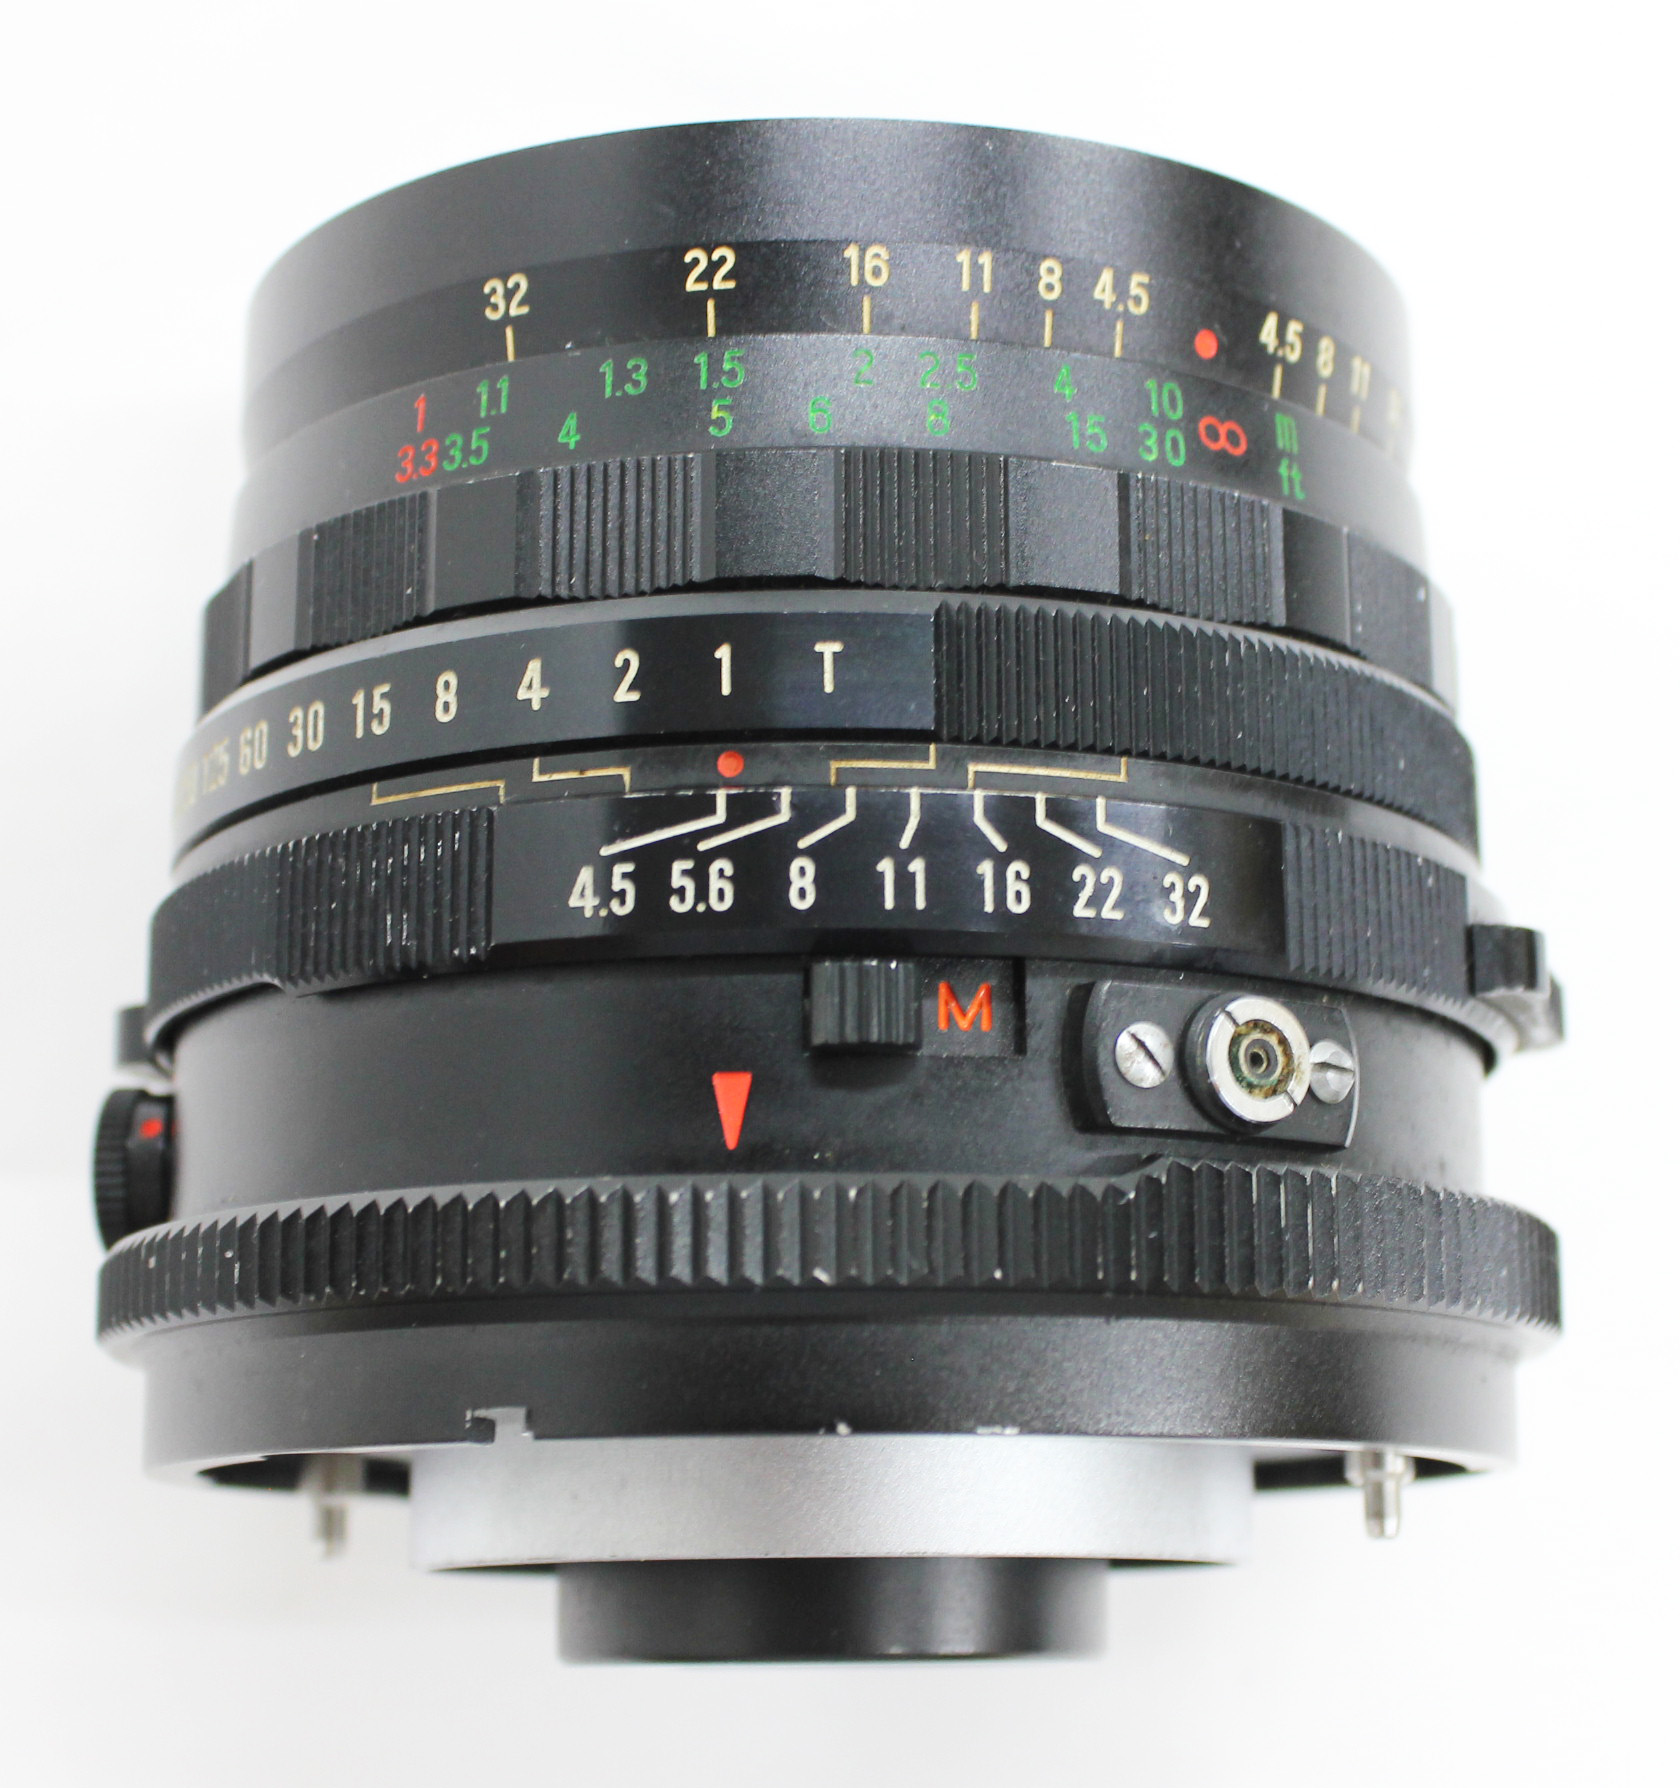 Mamiya Sekor C 50mm F/4.5 Wide Angle Lens for RB67 Pro S SD from 